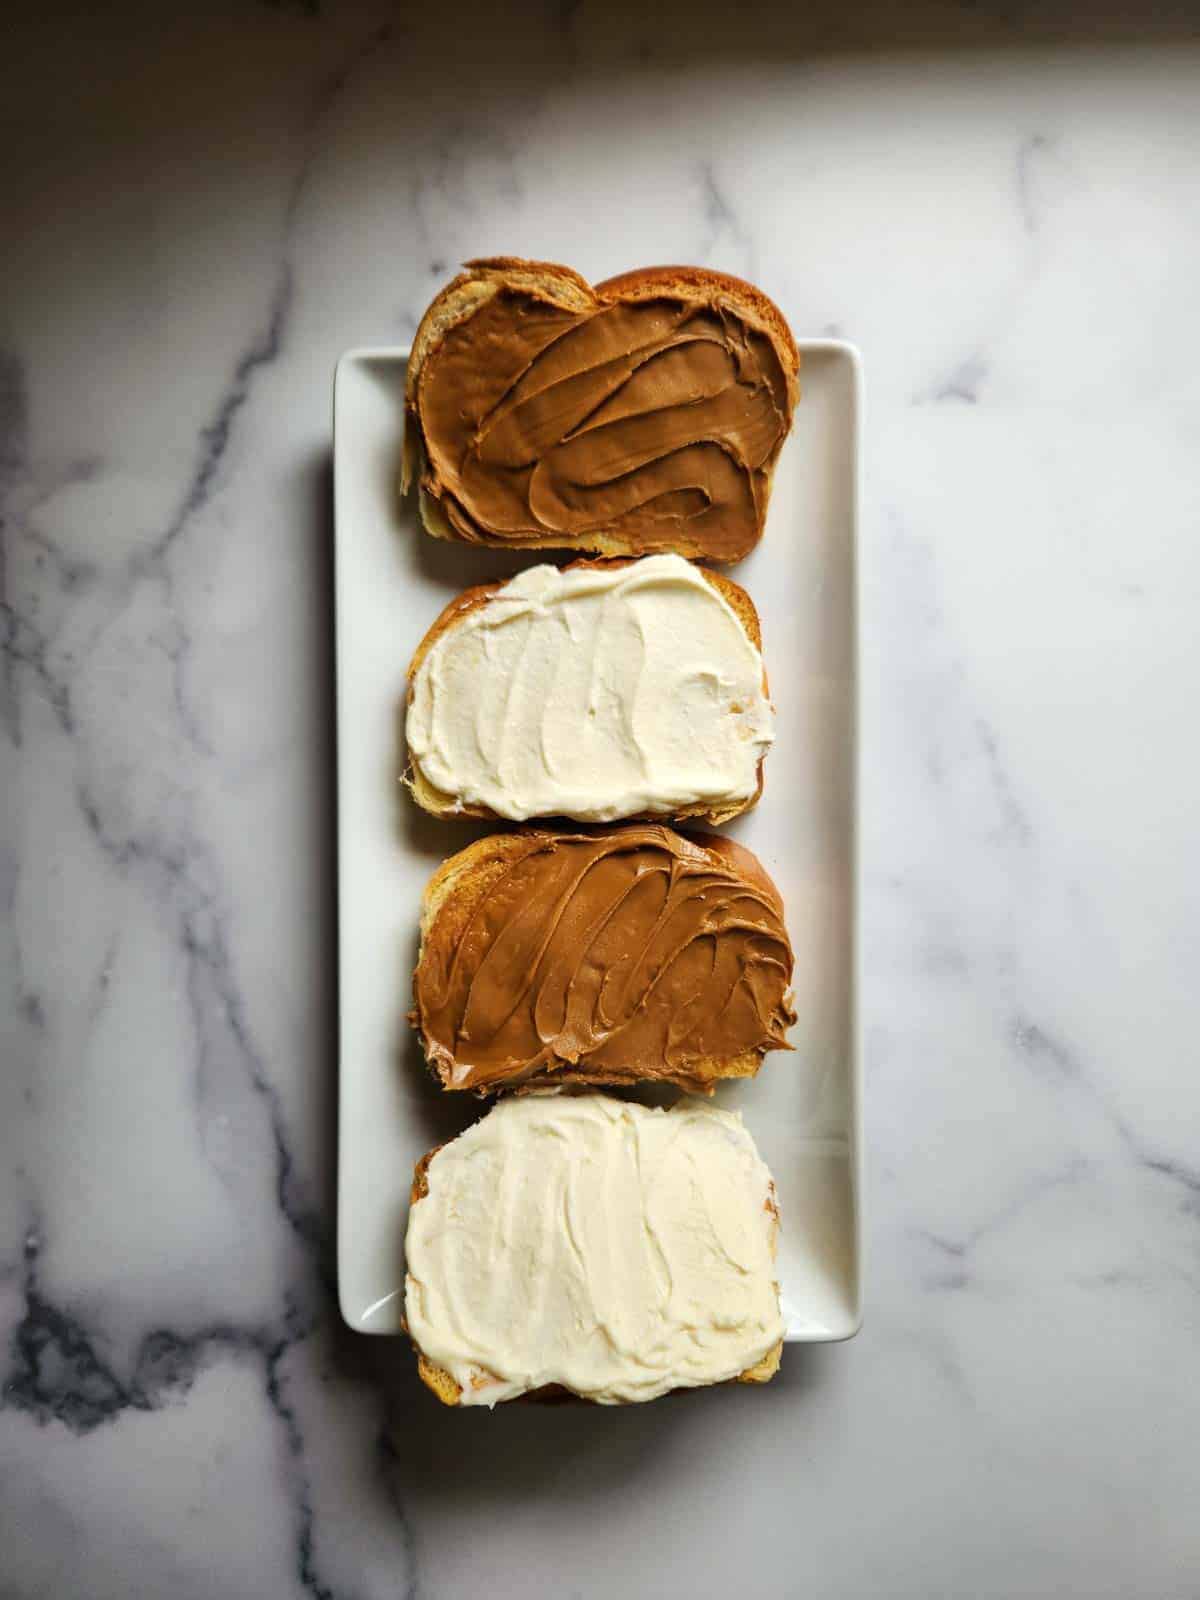 Biscoff and cream cheese spread on 4 pieces of bread.